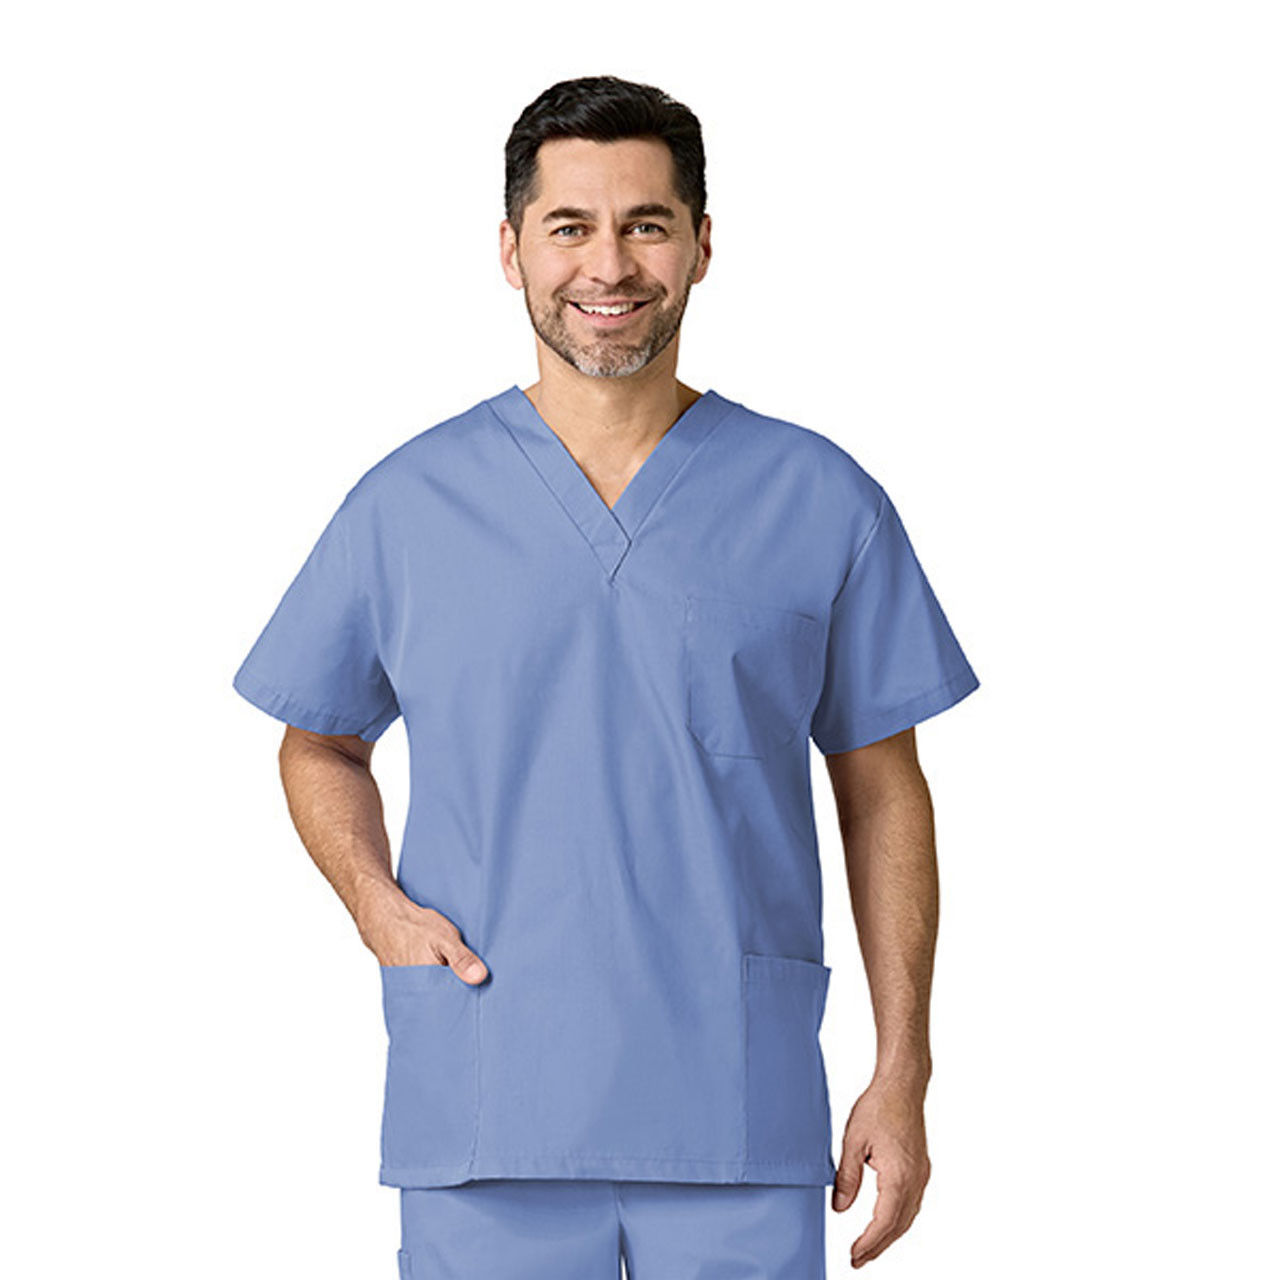 What special features do the wholesale scrub tops have?